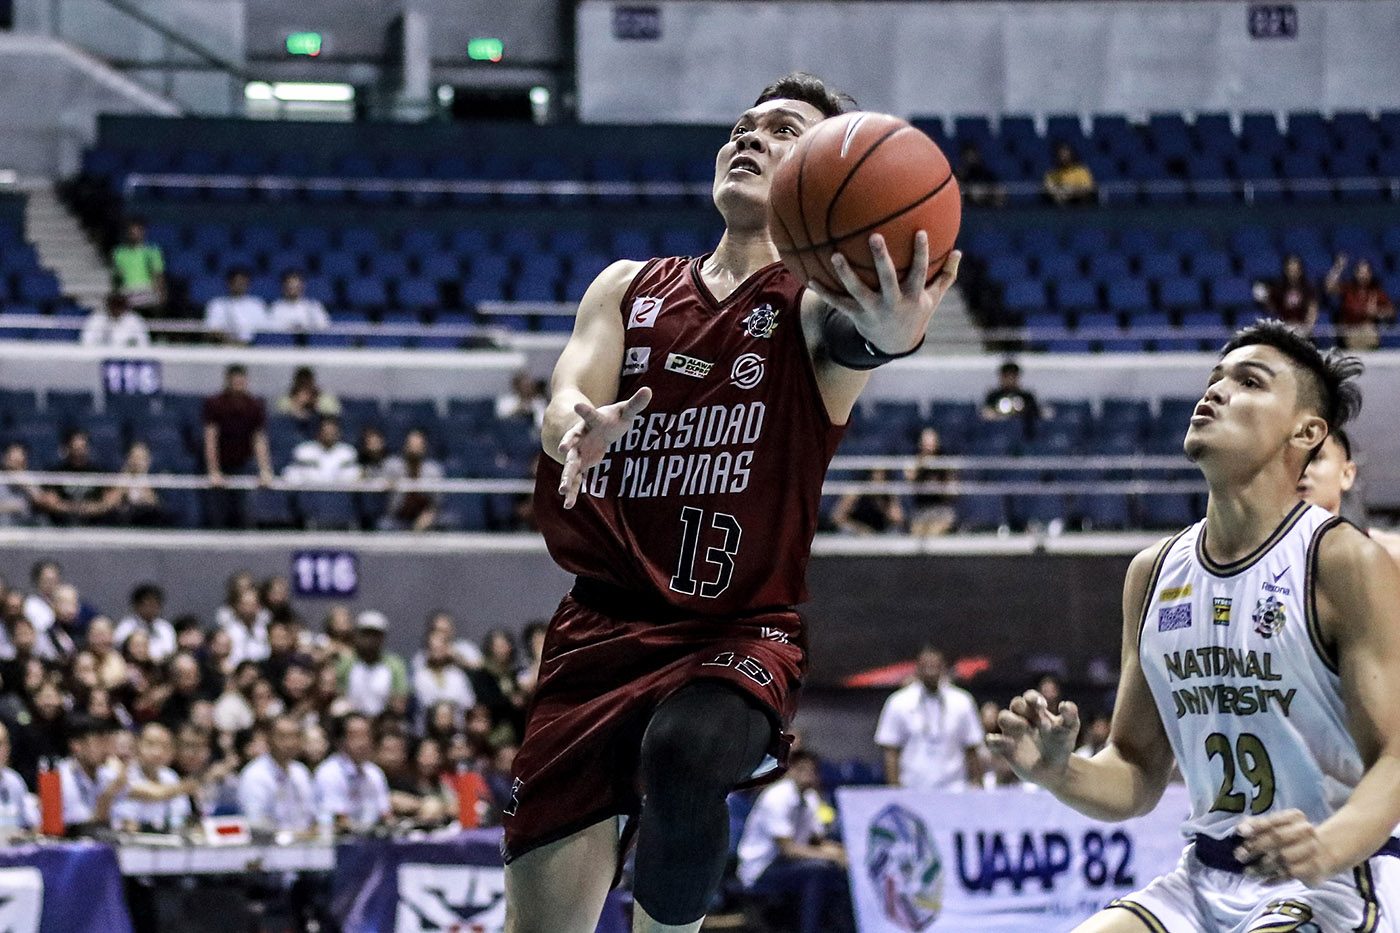 Manzo relishes last few games for UP with clutch performances